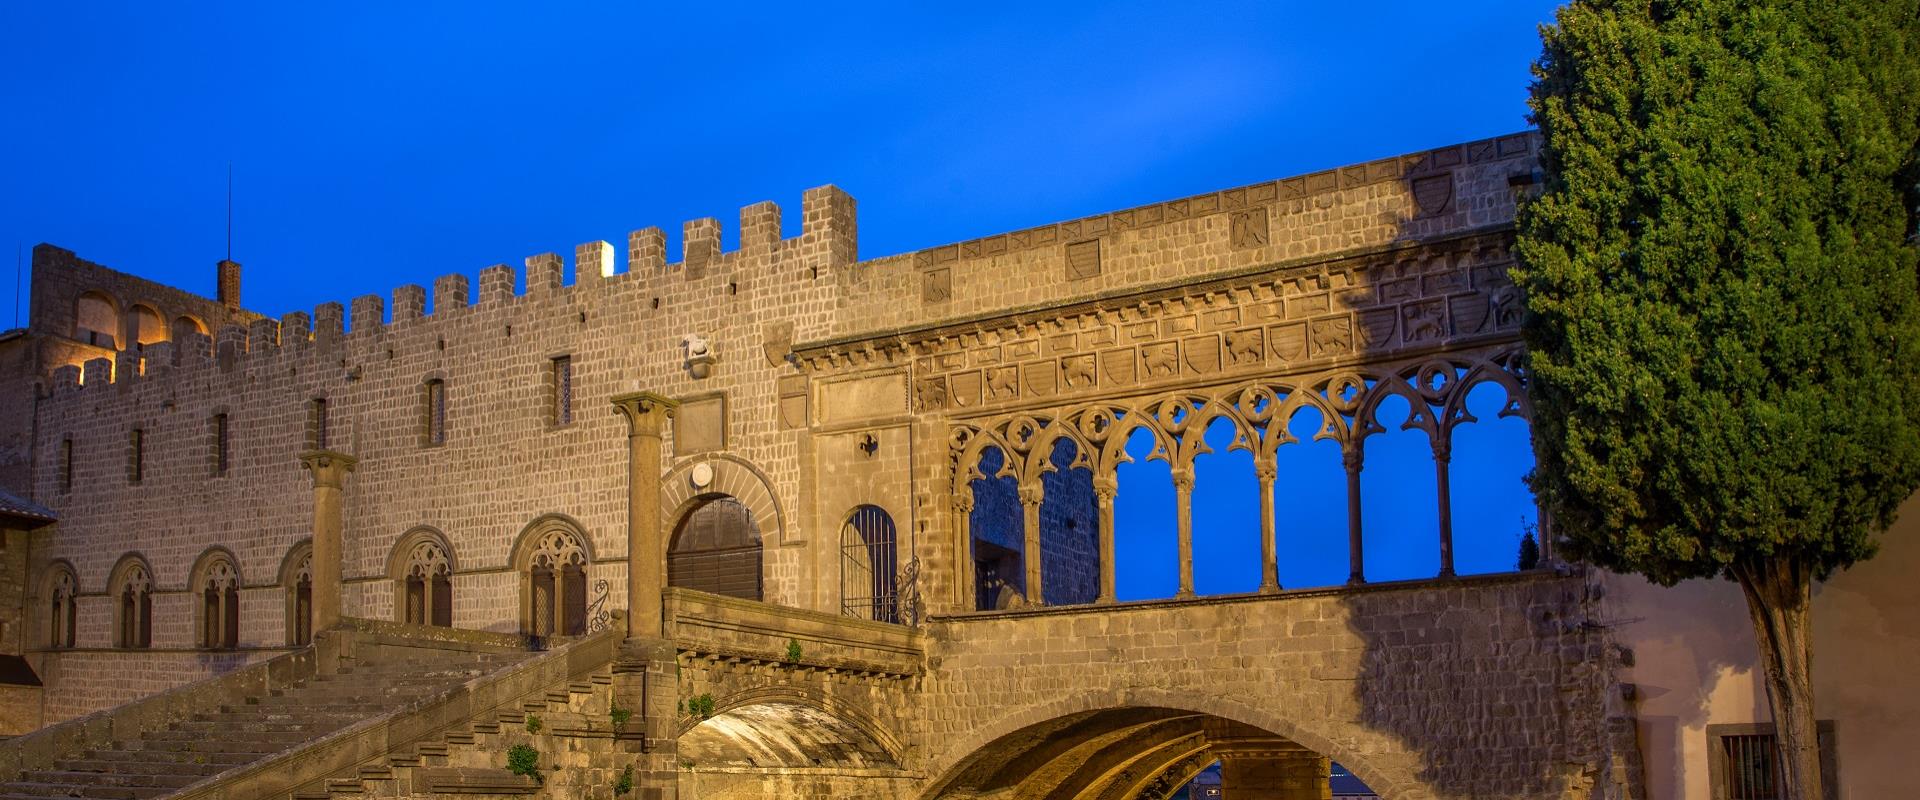 Discover the beauties of Viterbo with the BW Hotel Viterbo and book your stay!